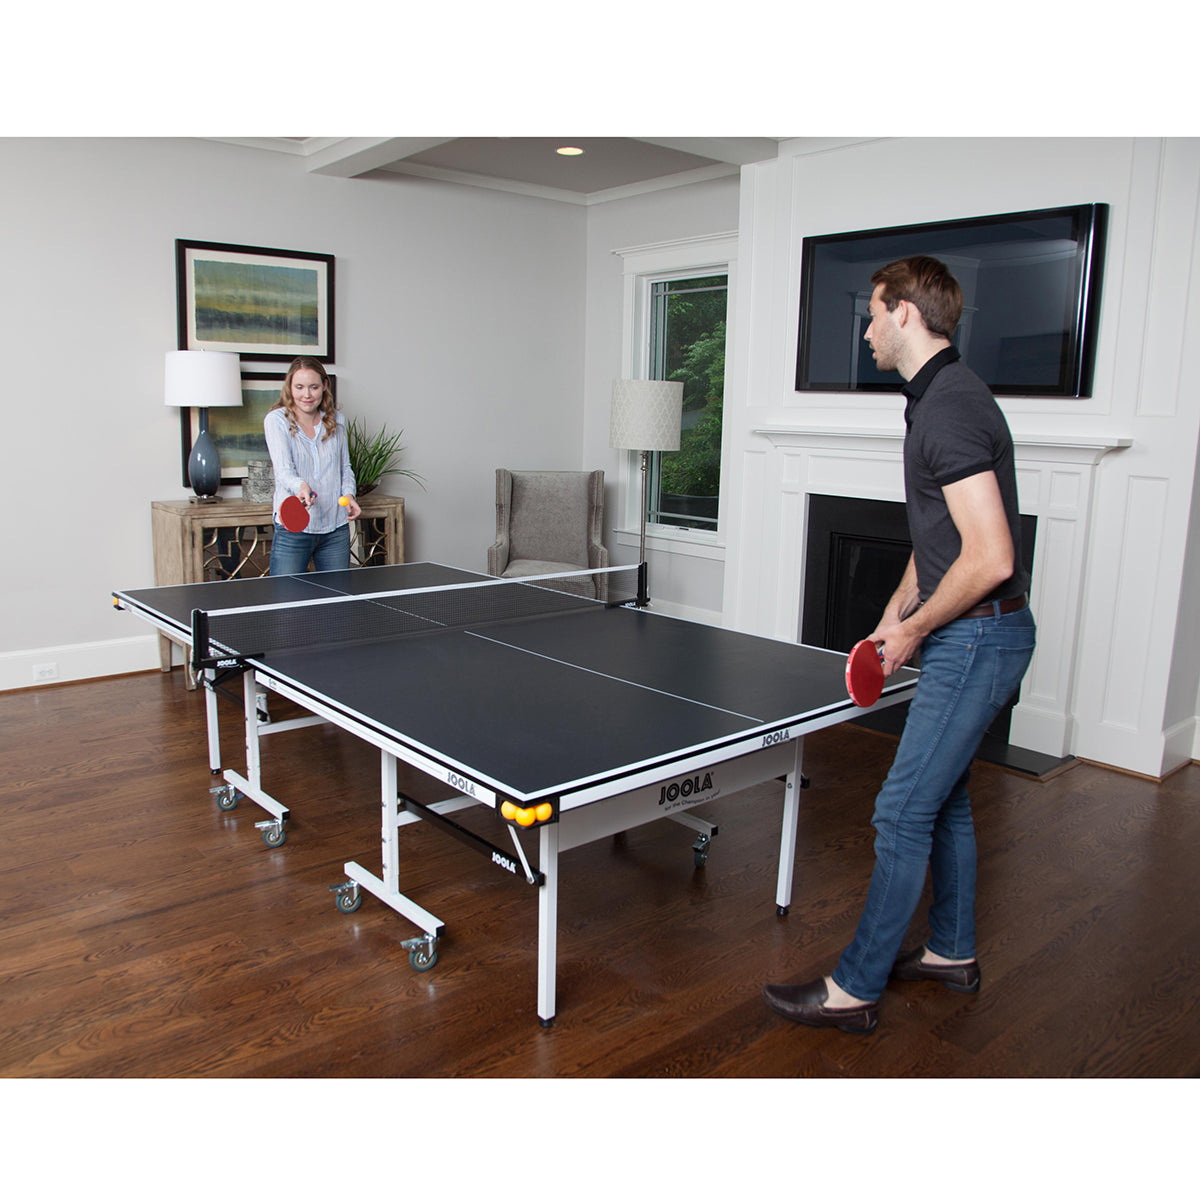 JOOLA DRIVE 1500 INDOOR TENNIS TABLE WITH NET SET (15MM THICK